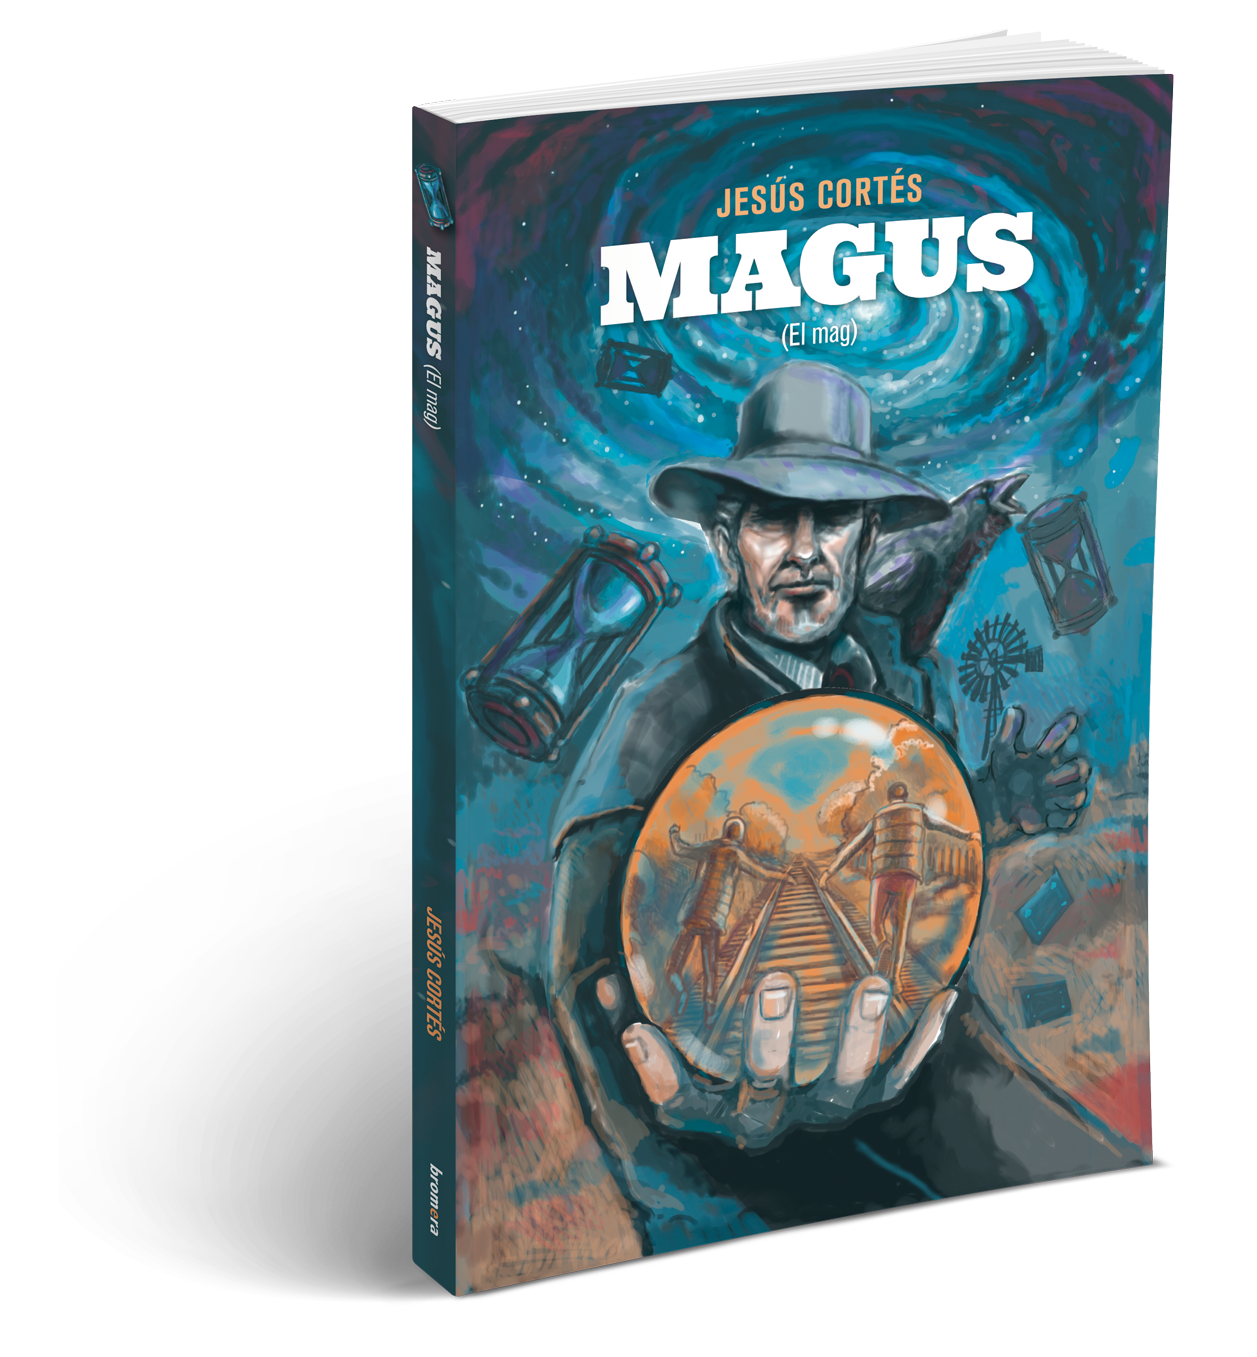 <p><strong>Magus (el mag)</strong></p>